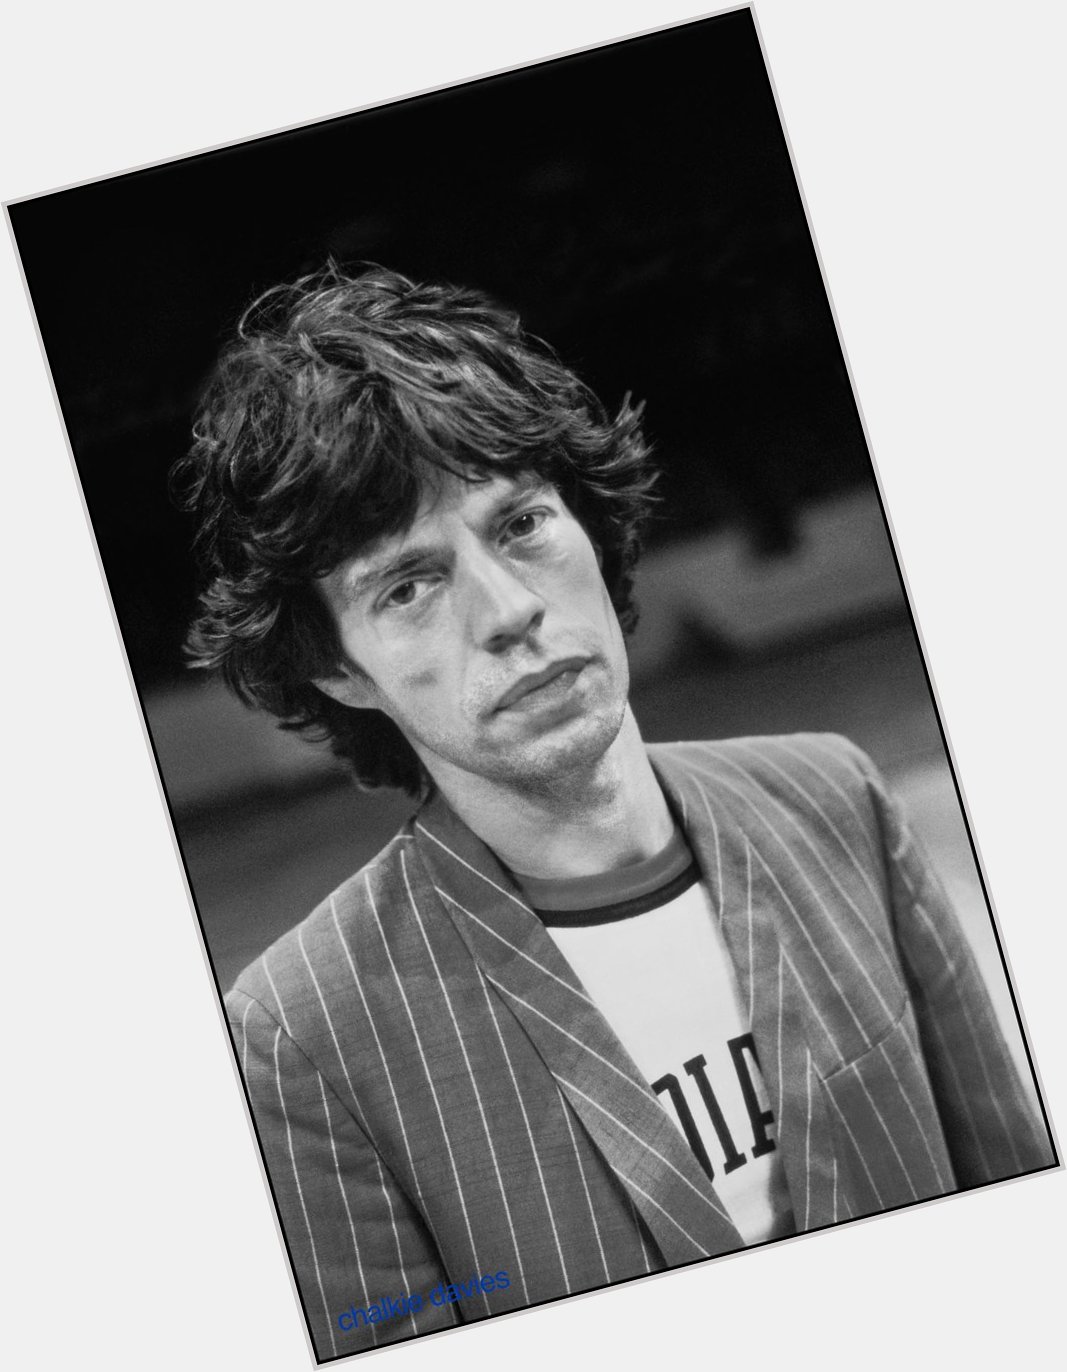 Happy Birthday to Mick Jagger. Photo was taken 37 years ago at the New Orleans Superdome, he was 38. 